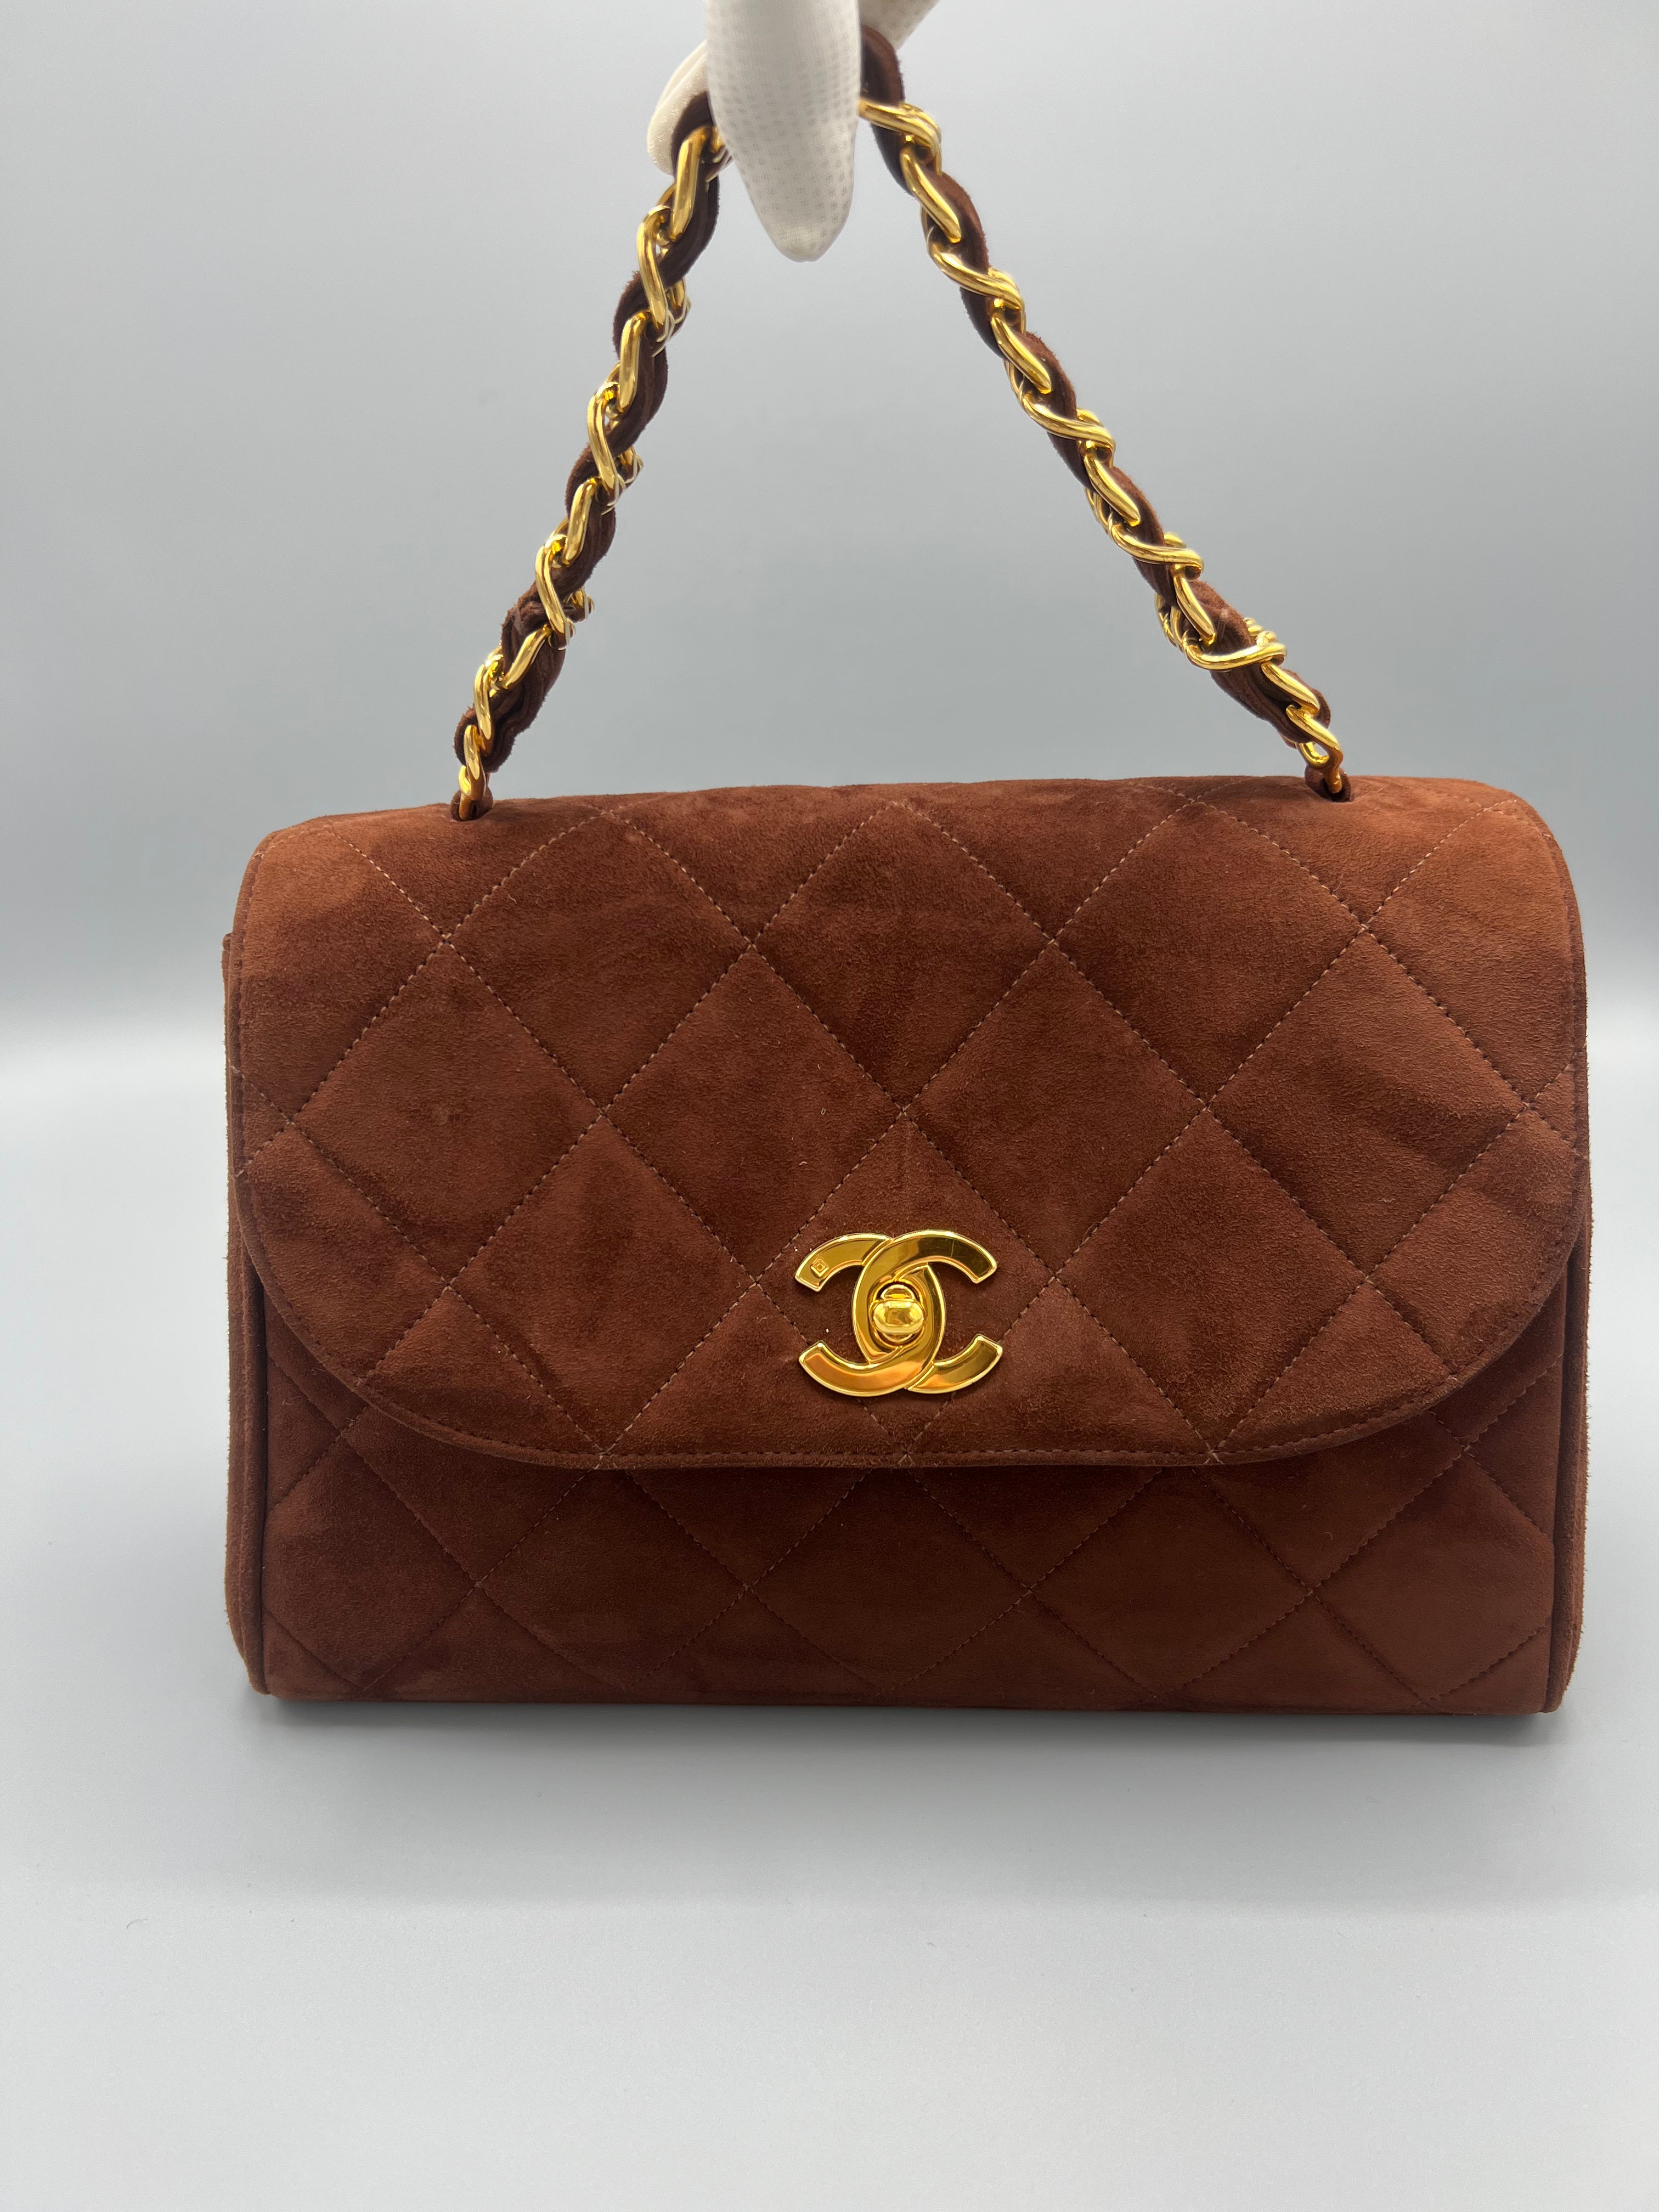 Rare Chanel Vintage quilted suede single flap bag